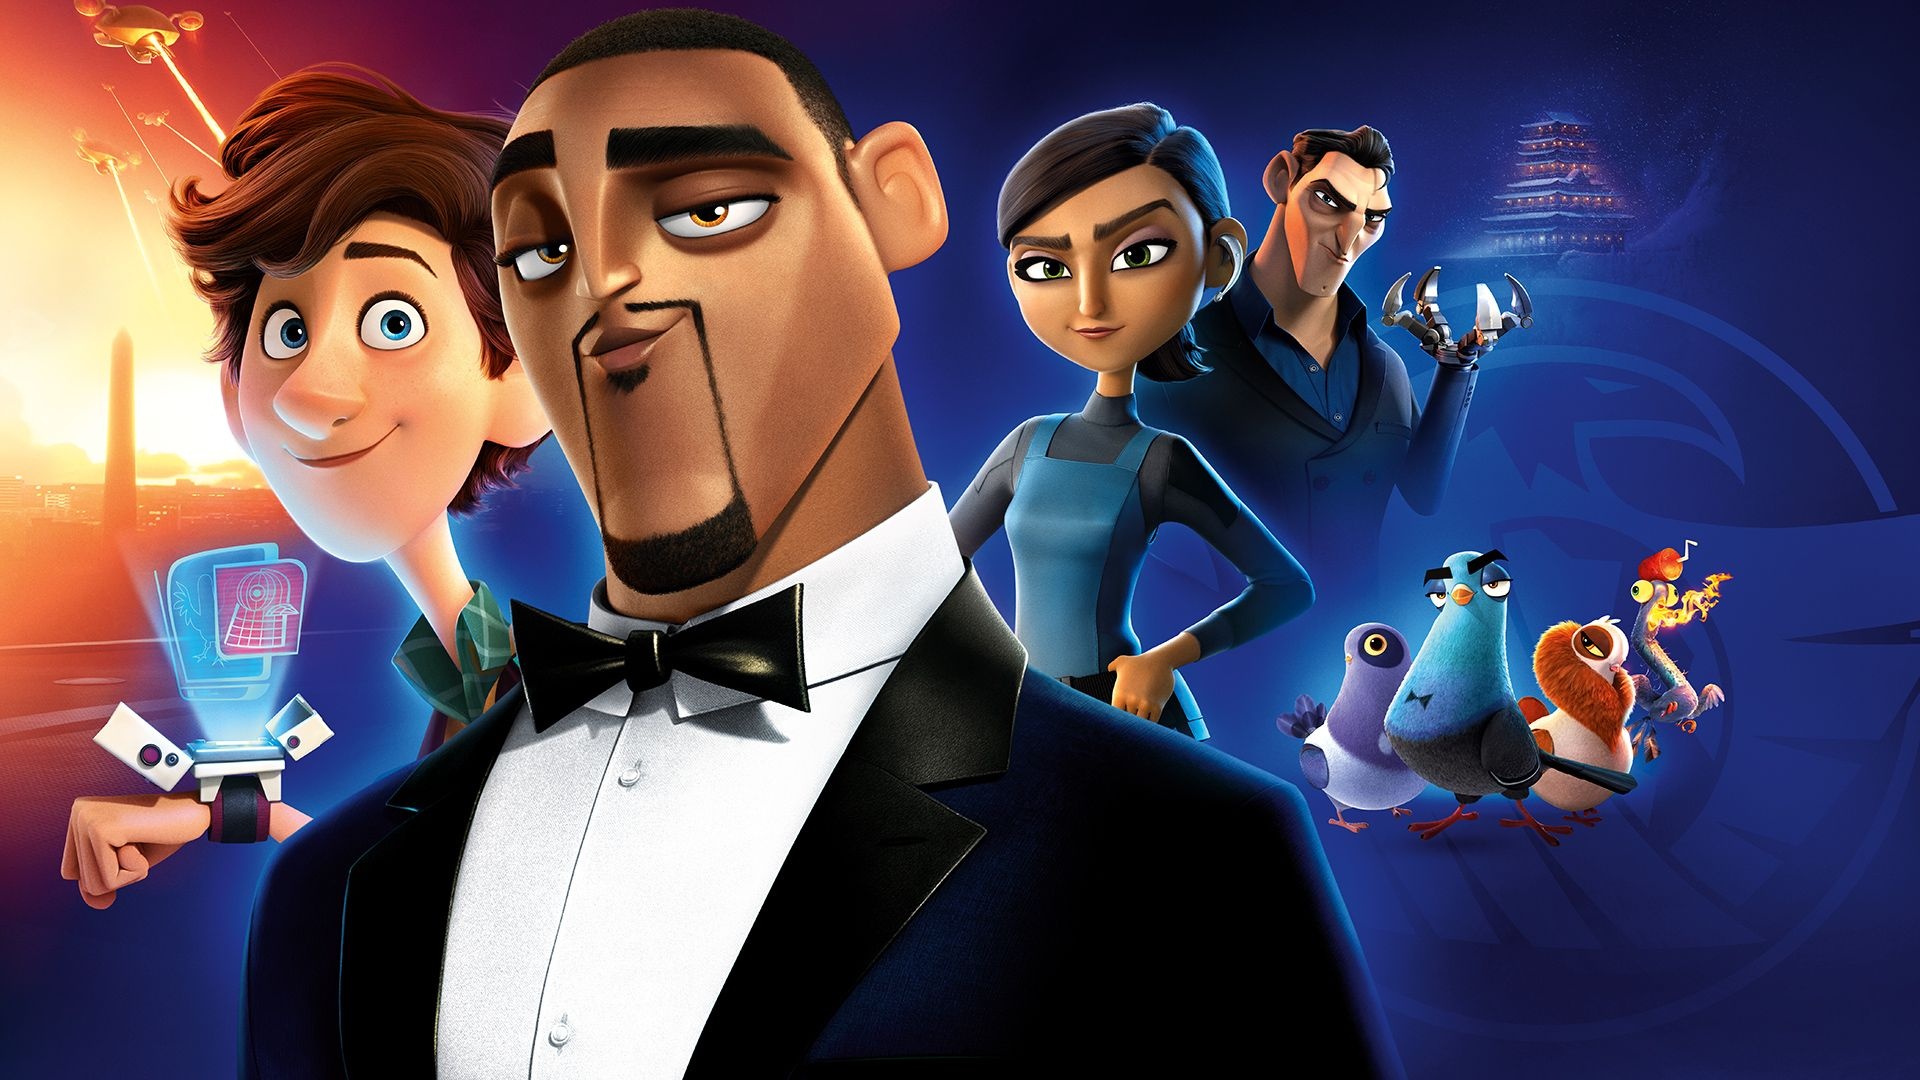 Spies in Disguise animation, Top wallpapers, 1920x1080 Full HD Desktop